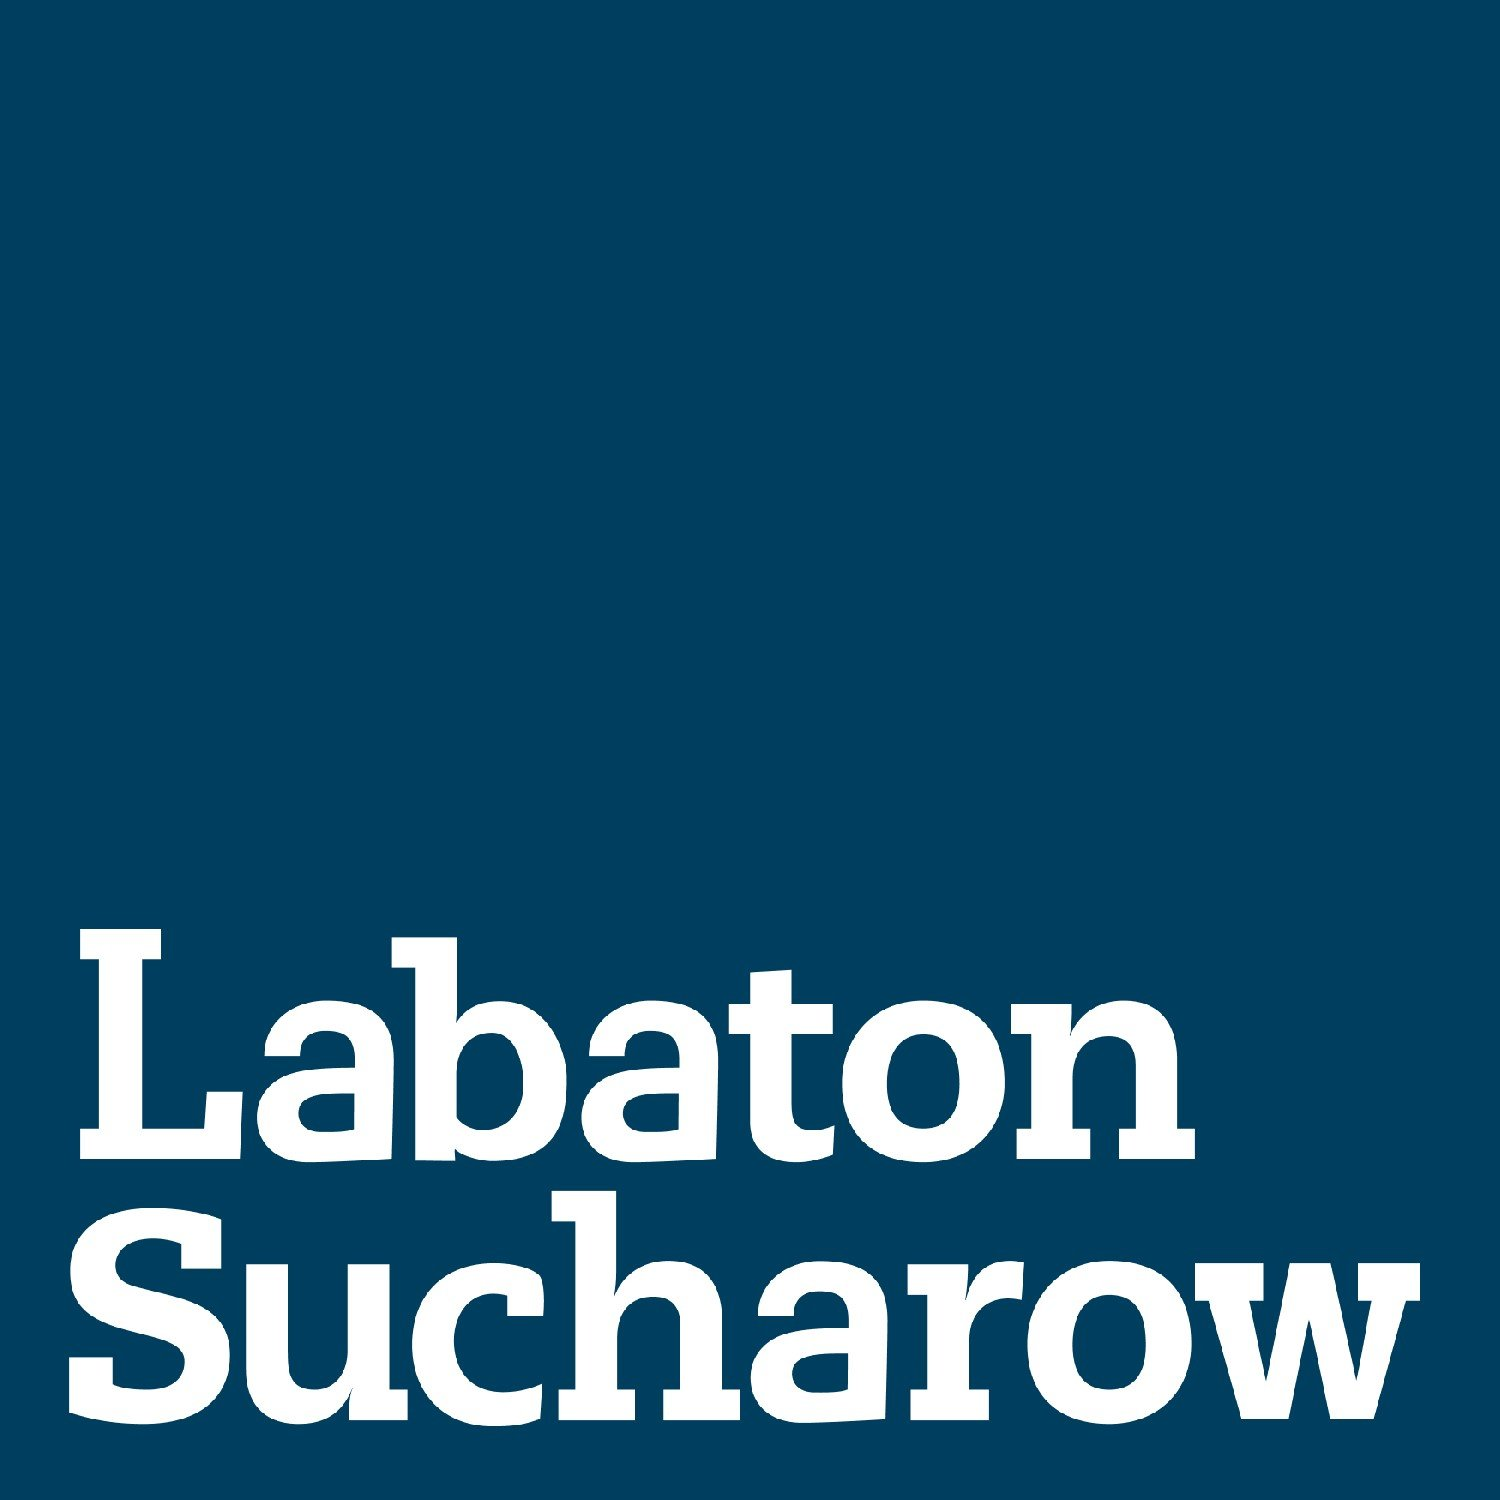 Labaton Sucharow LLP, Monday, May 24, 2021, Press release picture